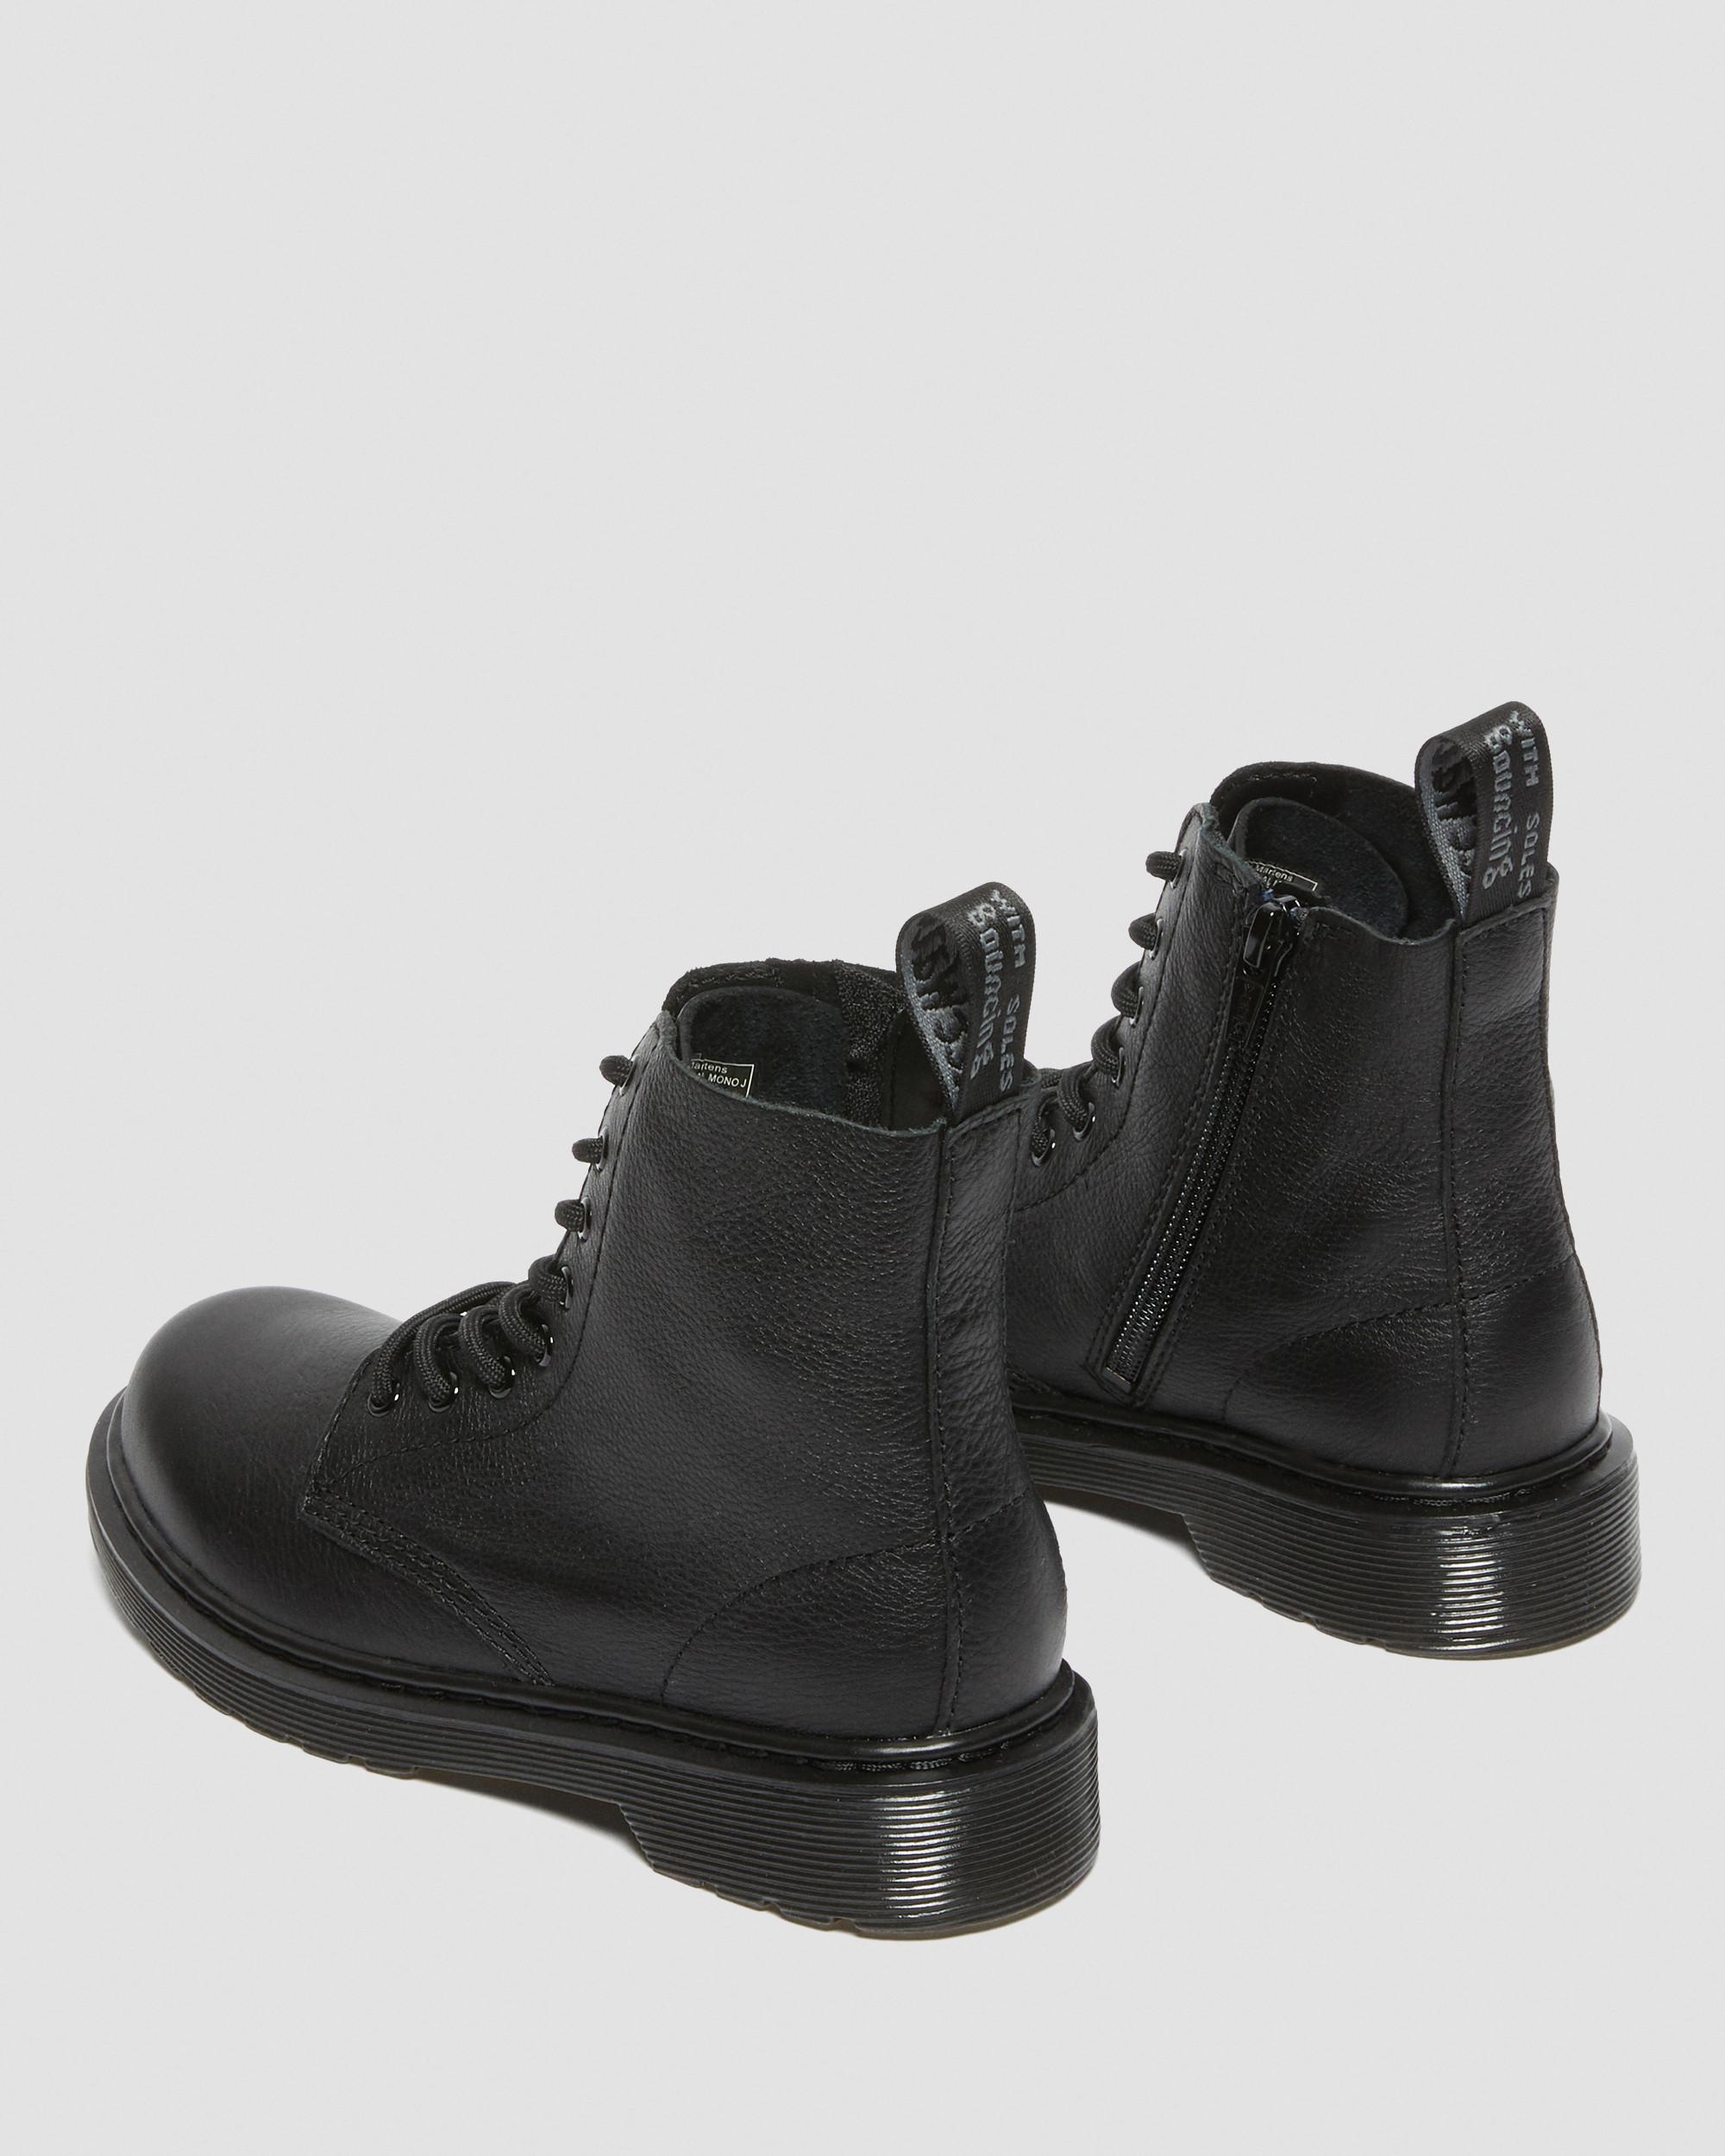 pascal soft leather dr martens